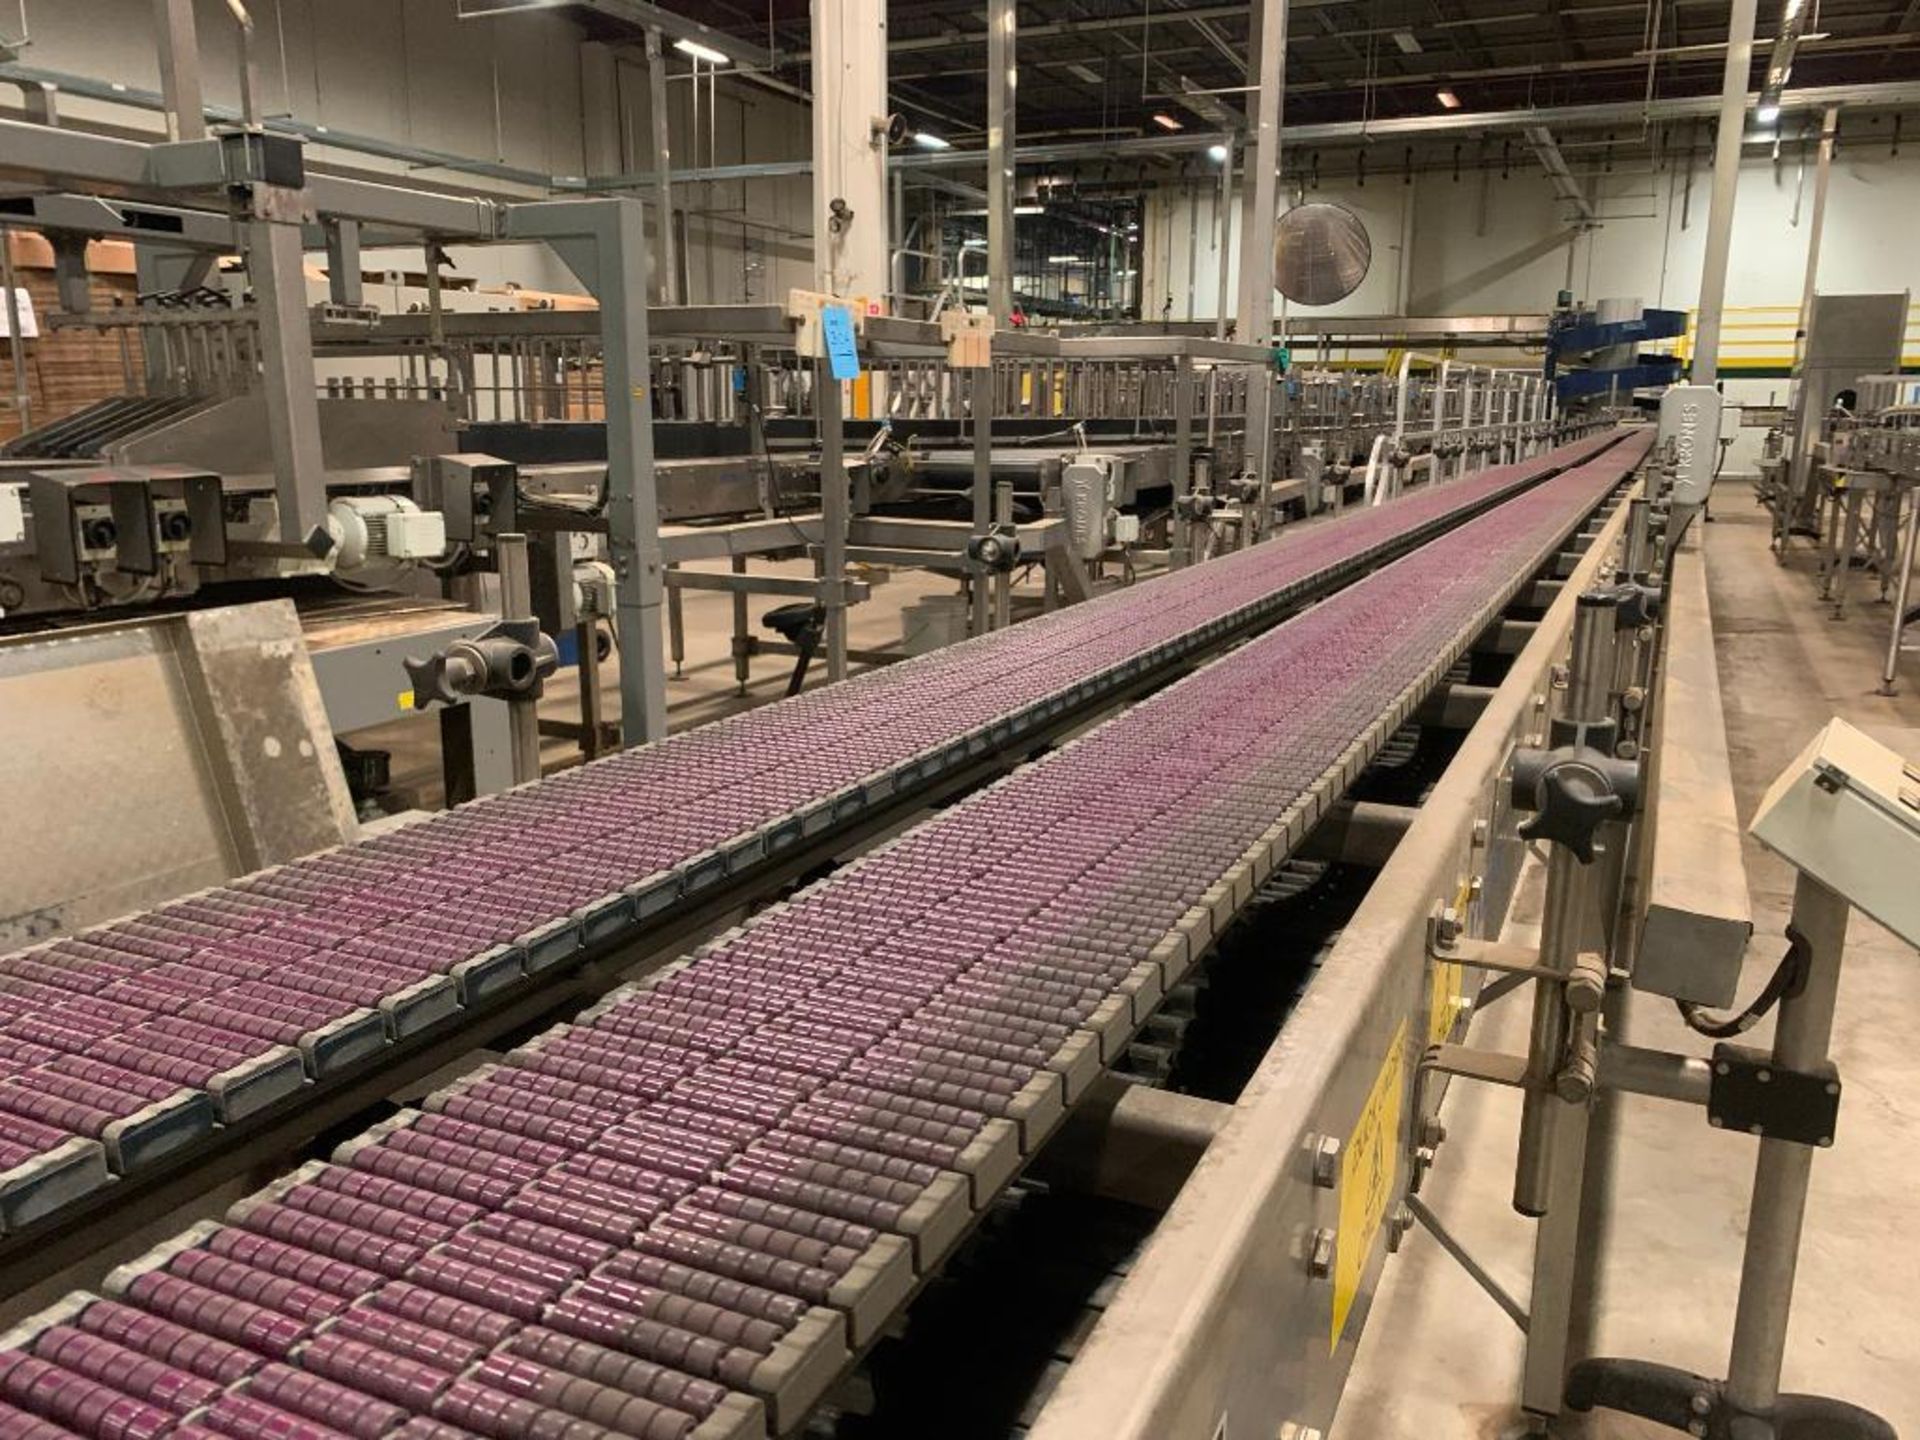 LOT: All Krones Multico S Full Case Conveyor throughout Packaging Area - Image 17 of 20